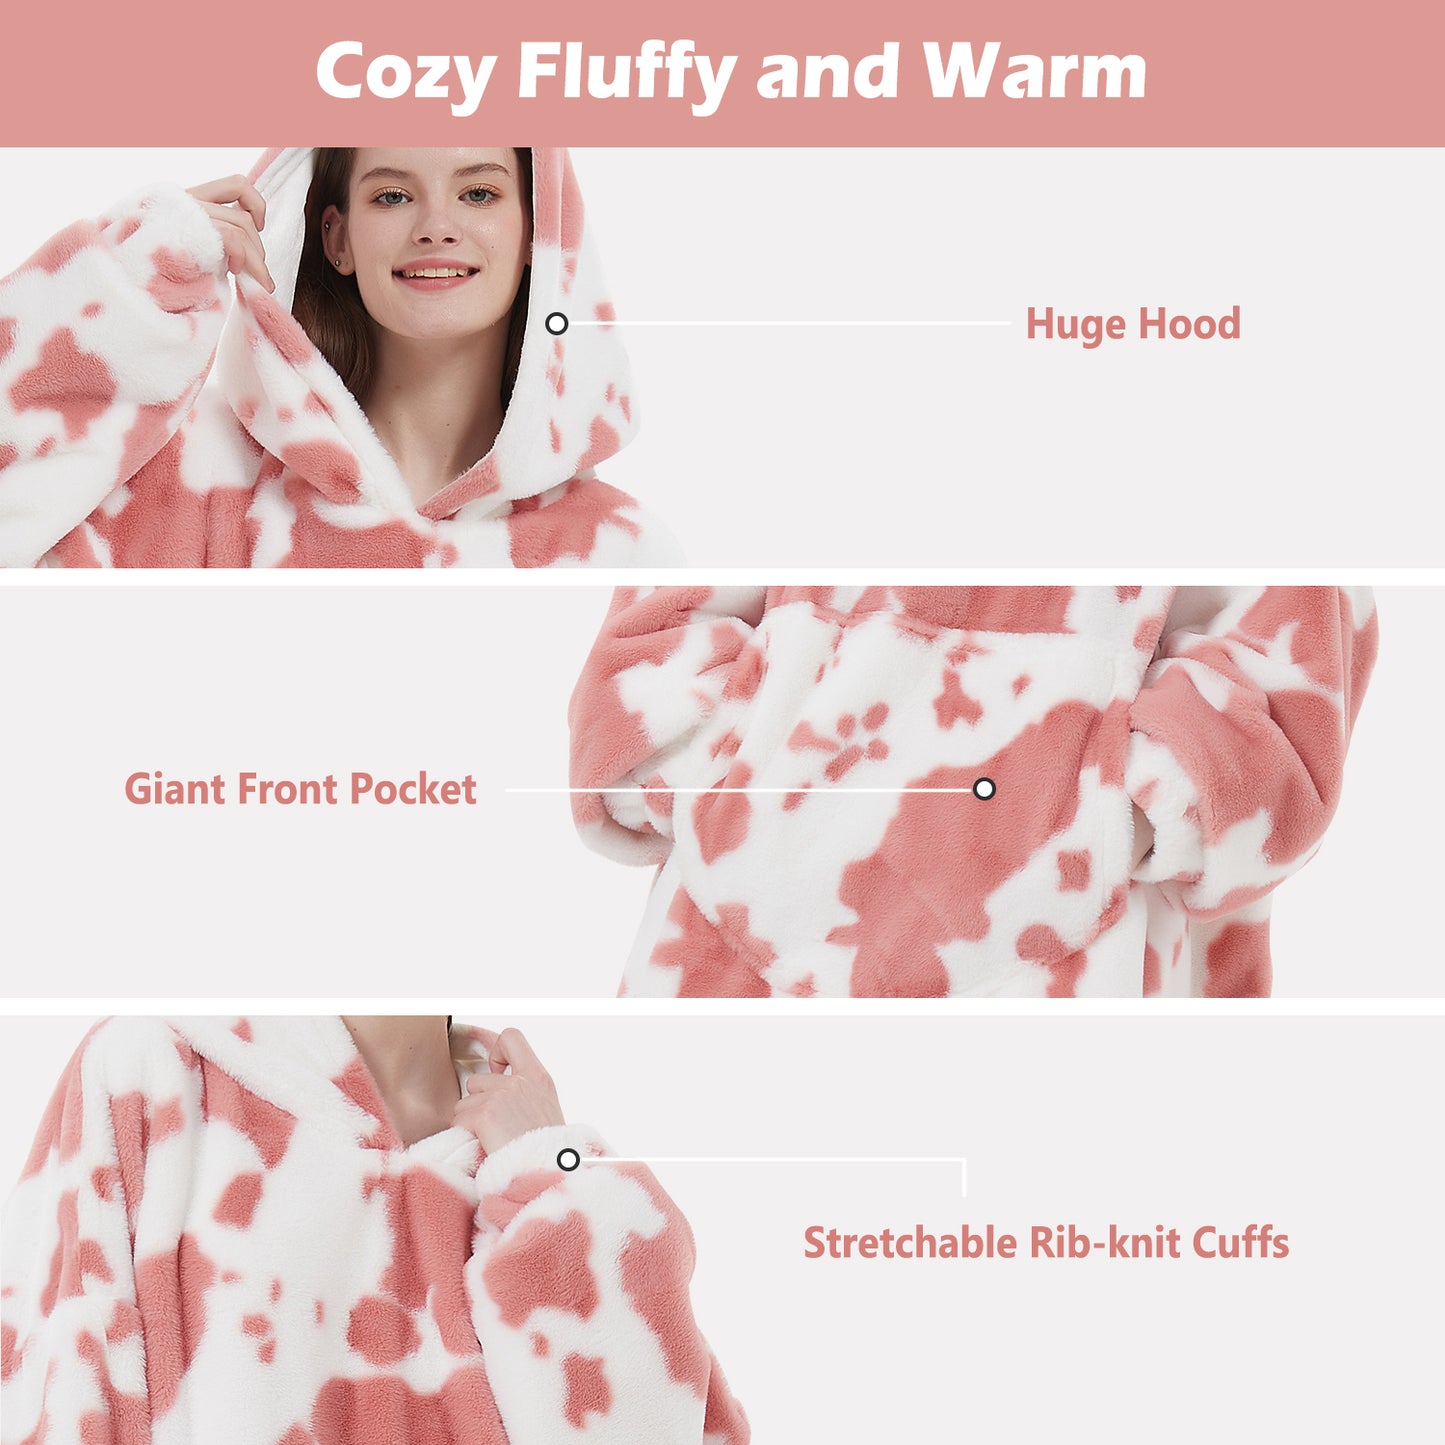 Softan Super Cozy Warm and Soft Hooded Blanket Sweatshirt, Faux Fur Blanket Sweatshirt with Large Pocket, One Size Fits All